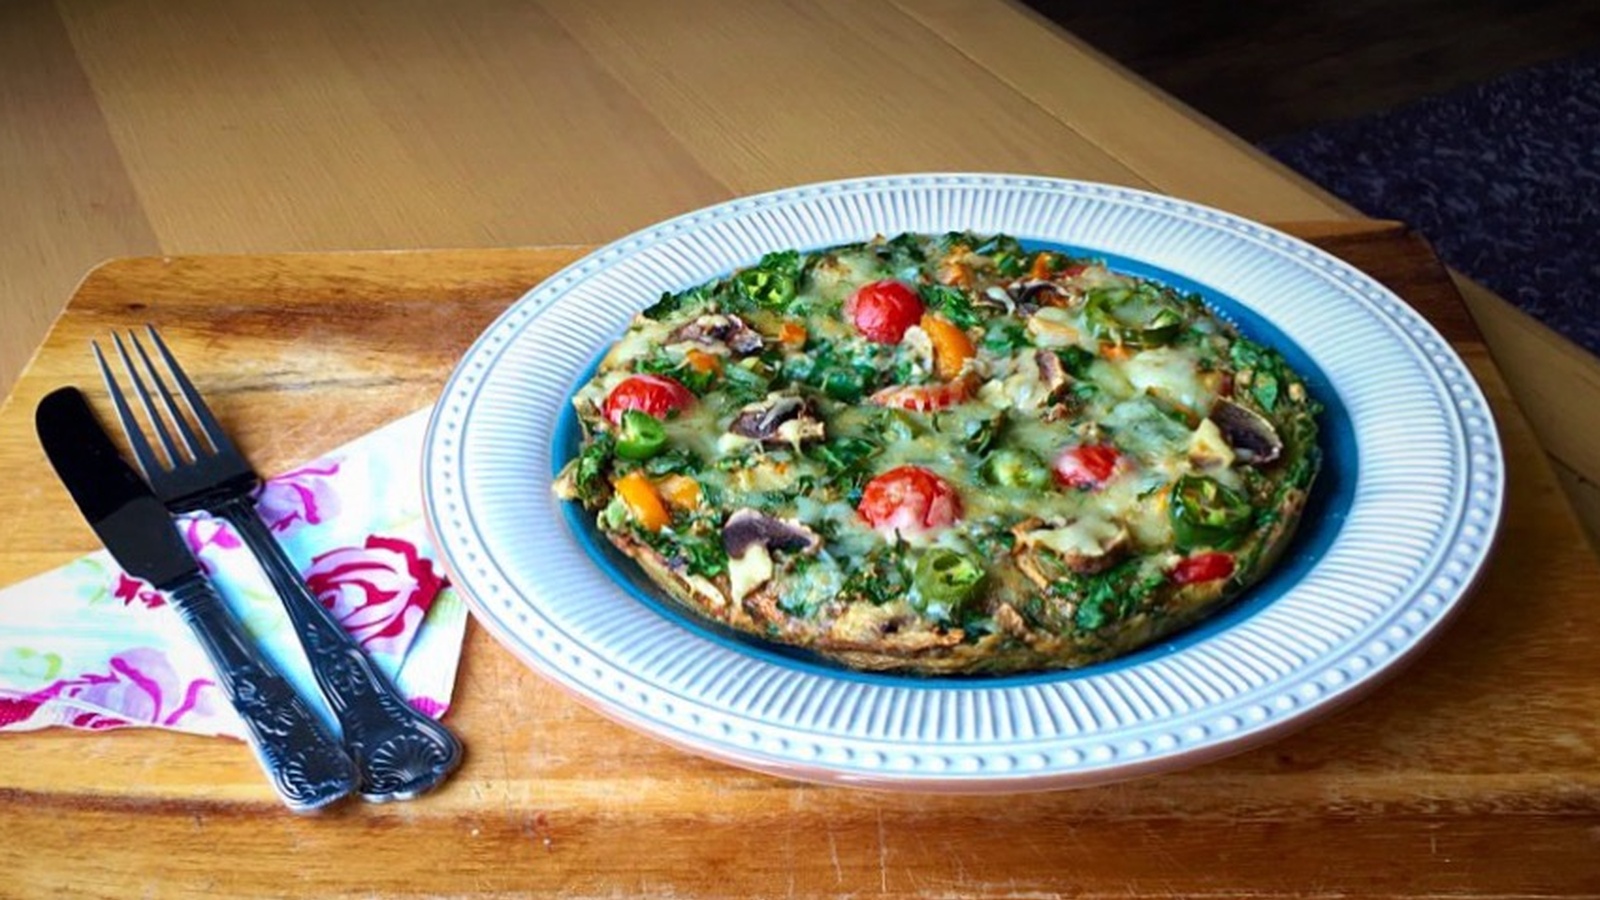 Finally, A Gluten and Dairy-Free Pizza That Doesn’t Taste Like Cardboard (Recipe)